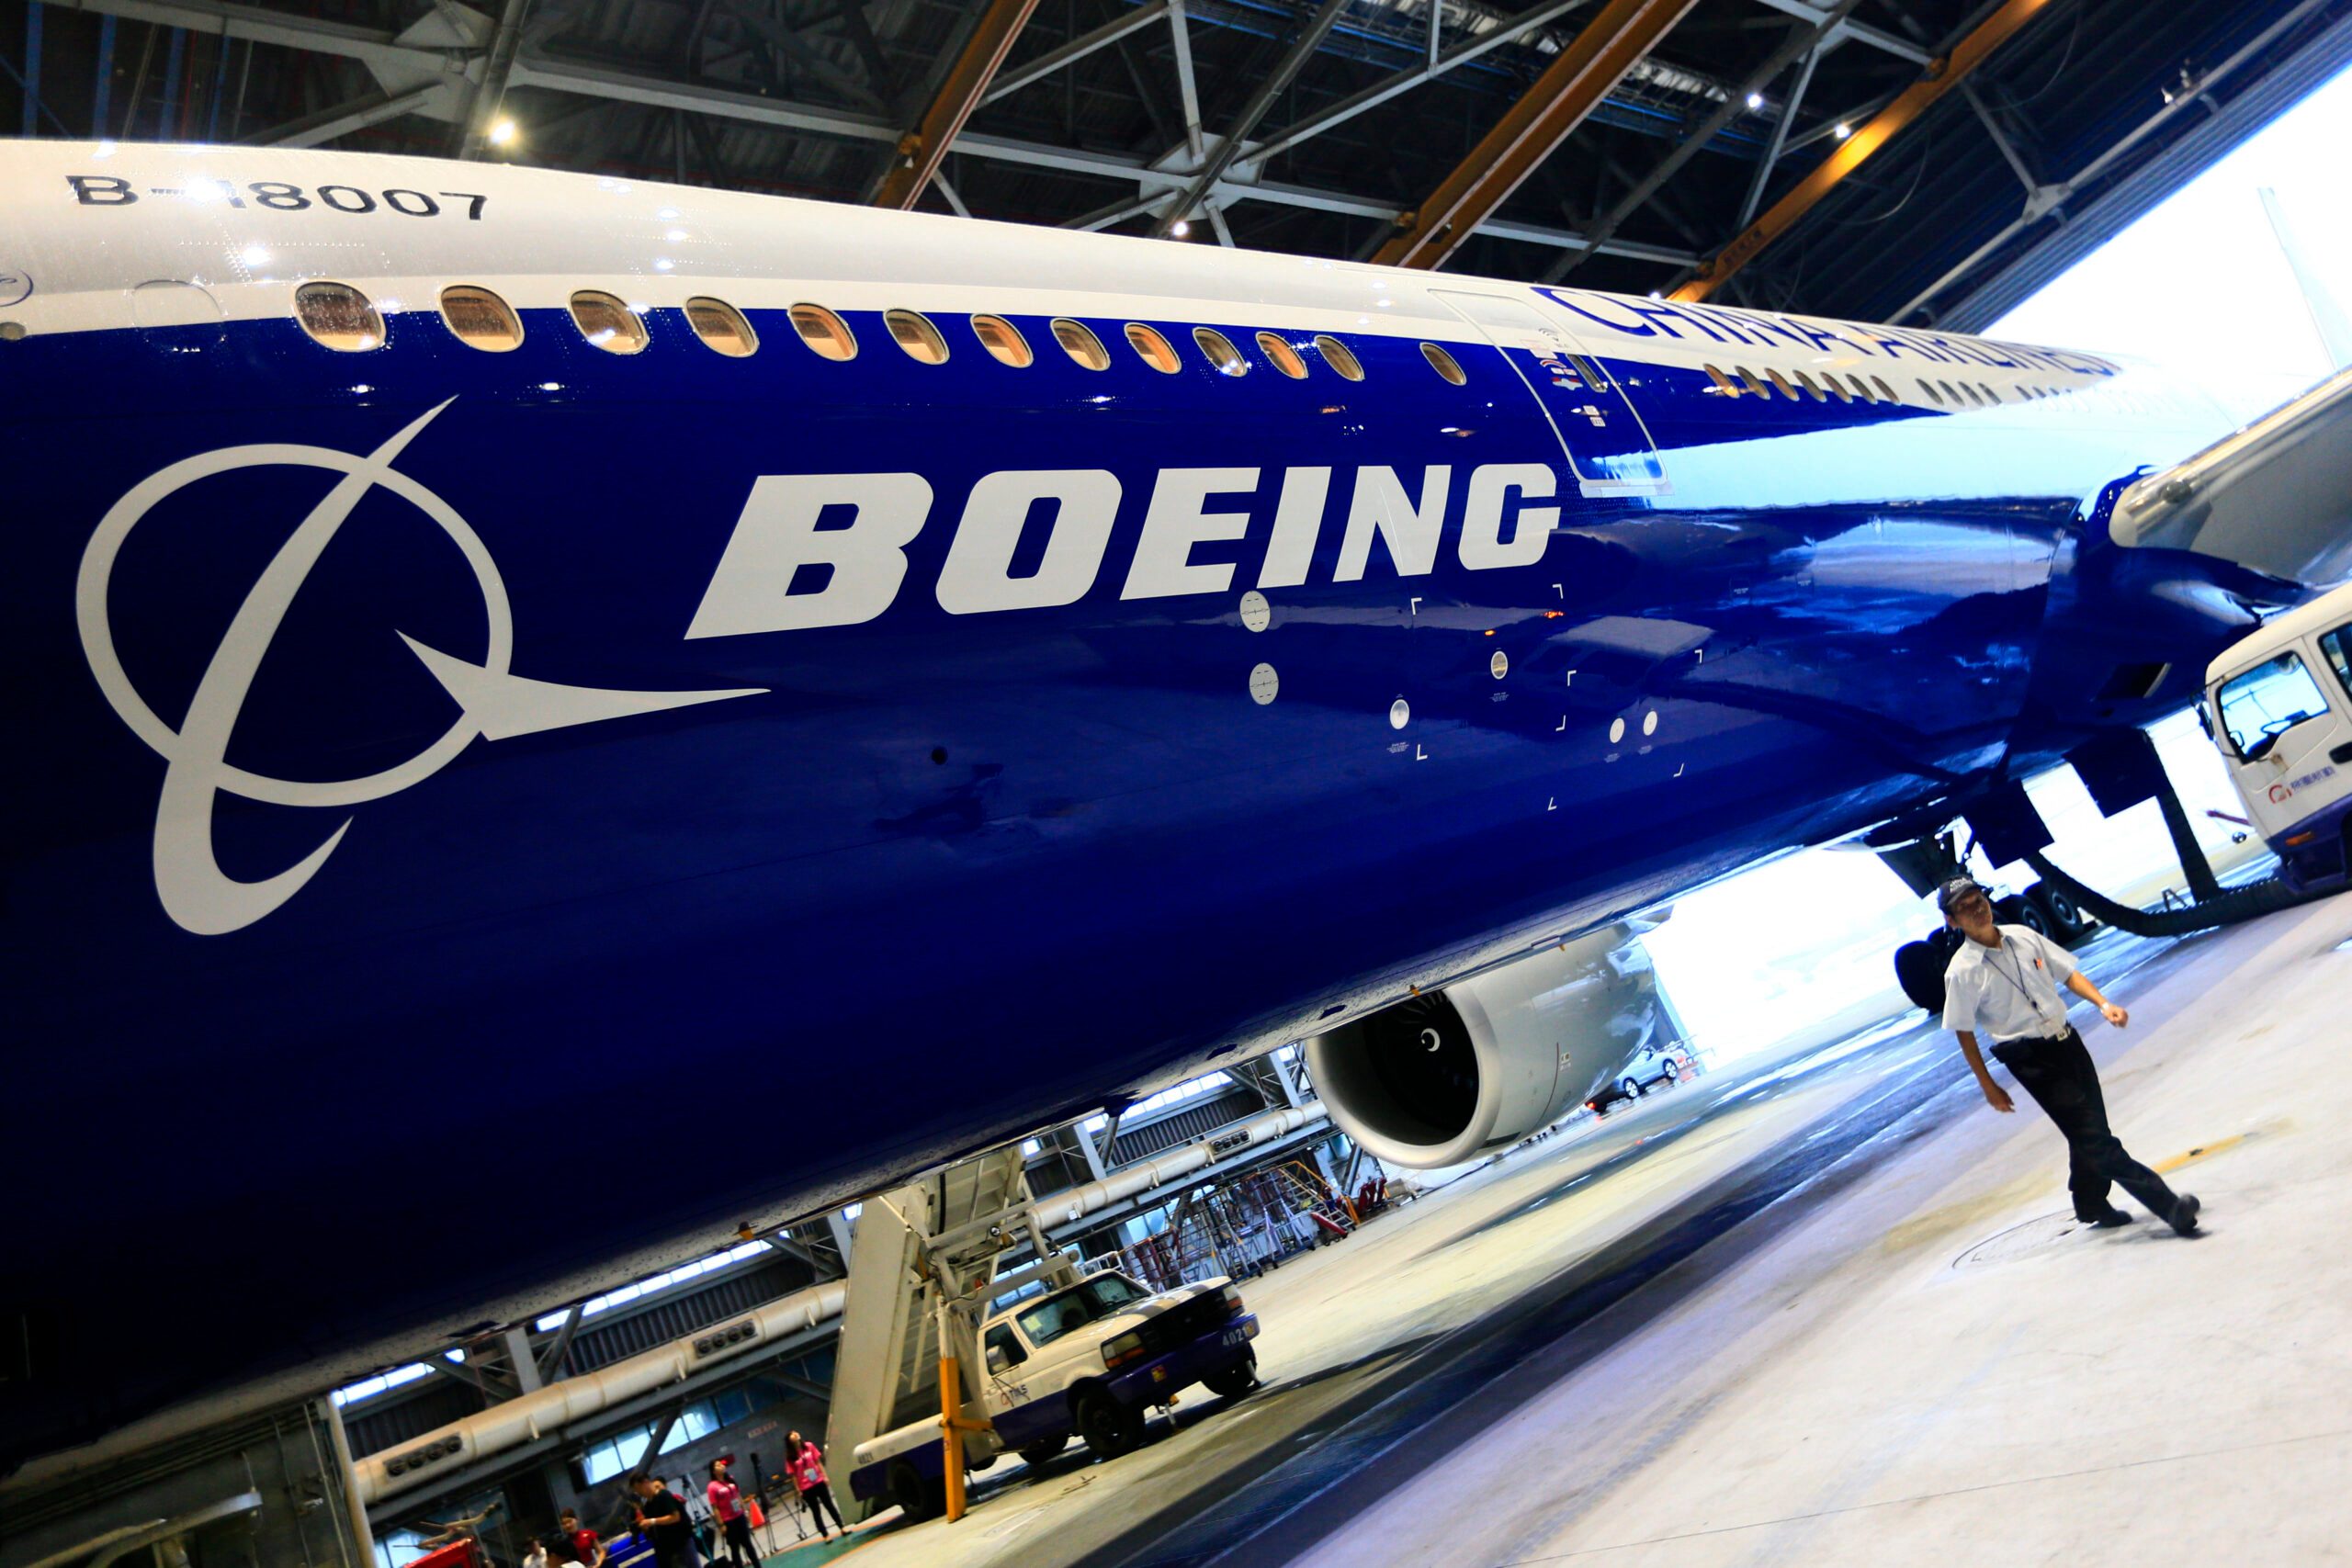 Iran reaches deal to purchase 100 Boeing planes